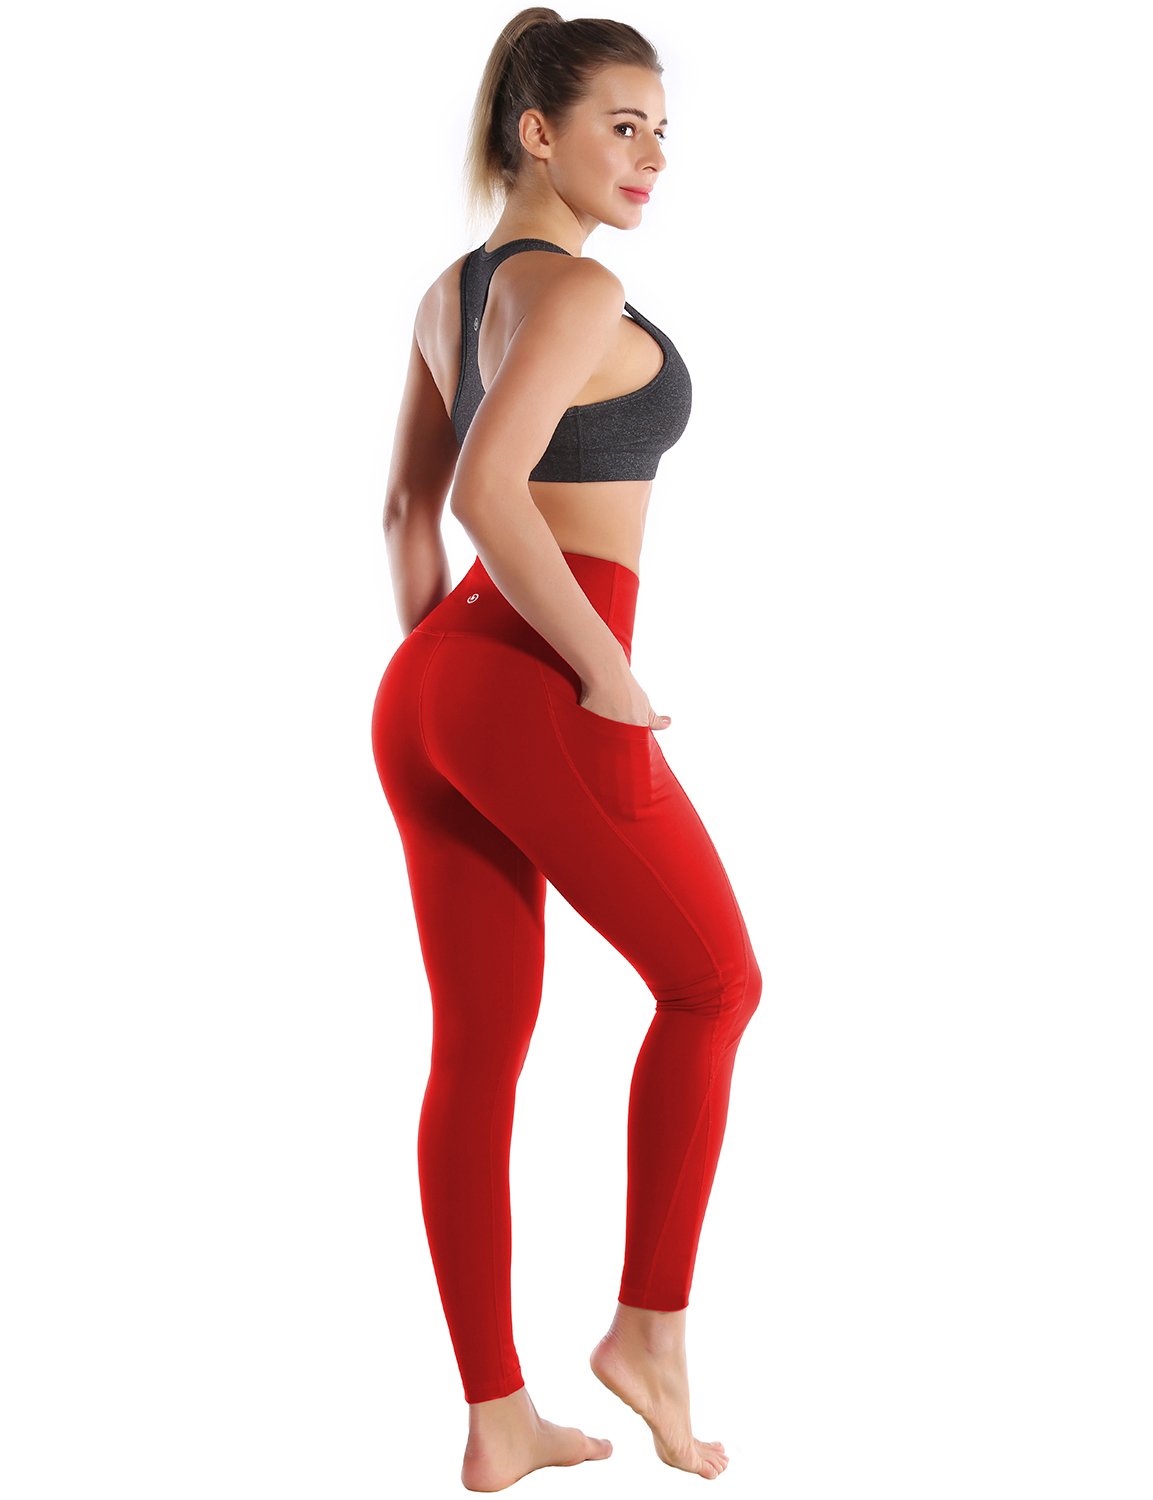 High Waist Side Pockets Jogging Pants scarlet 75% Nylon, 25% Spandex Fabric doesn't attract lint easily 4-way stretch No see-through Moisture-wicking Tummy control Inner pocket